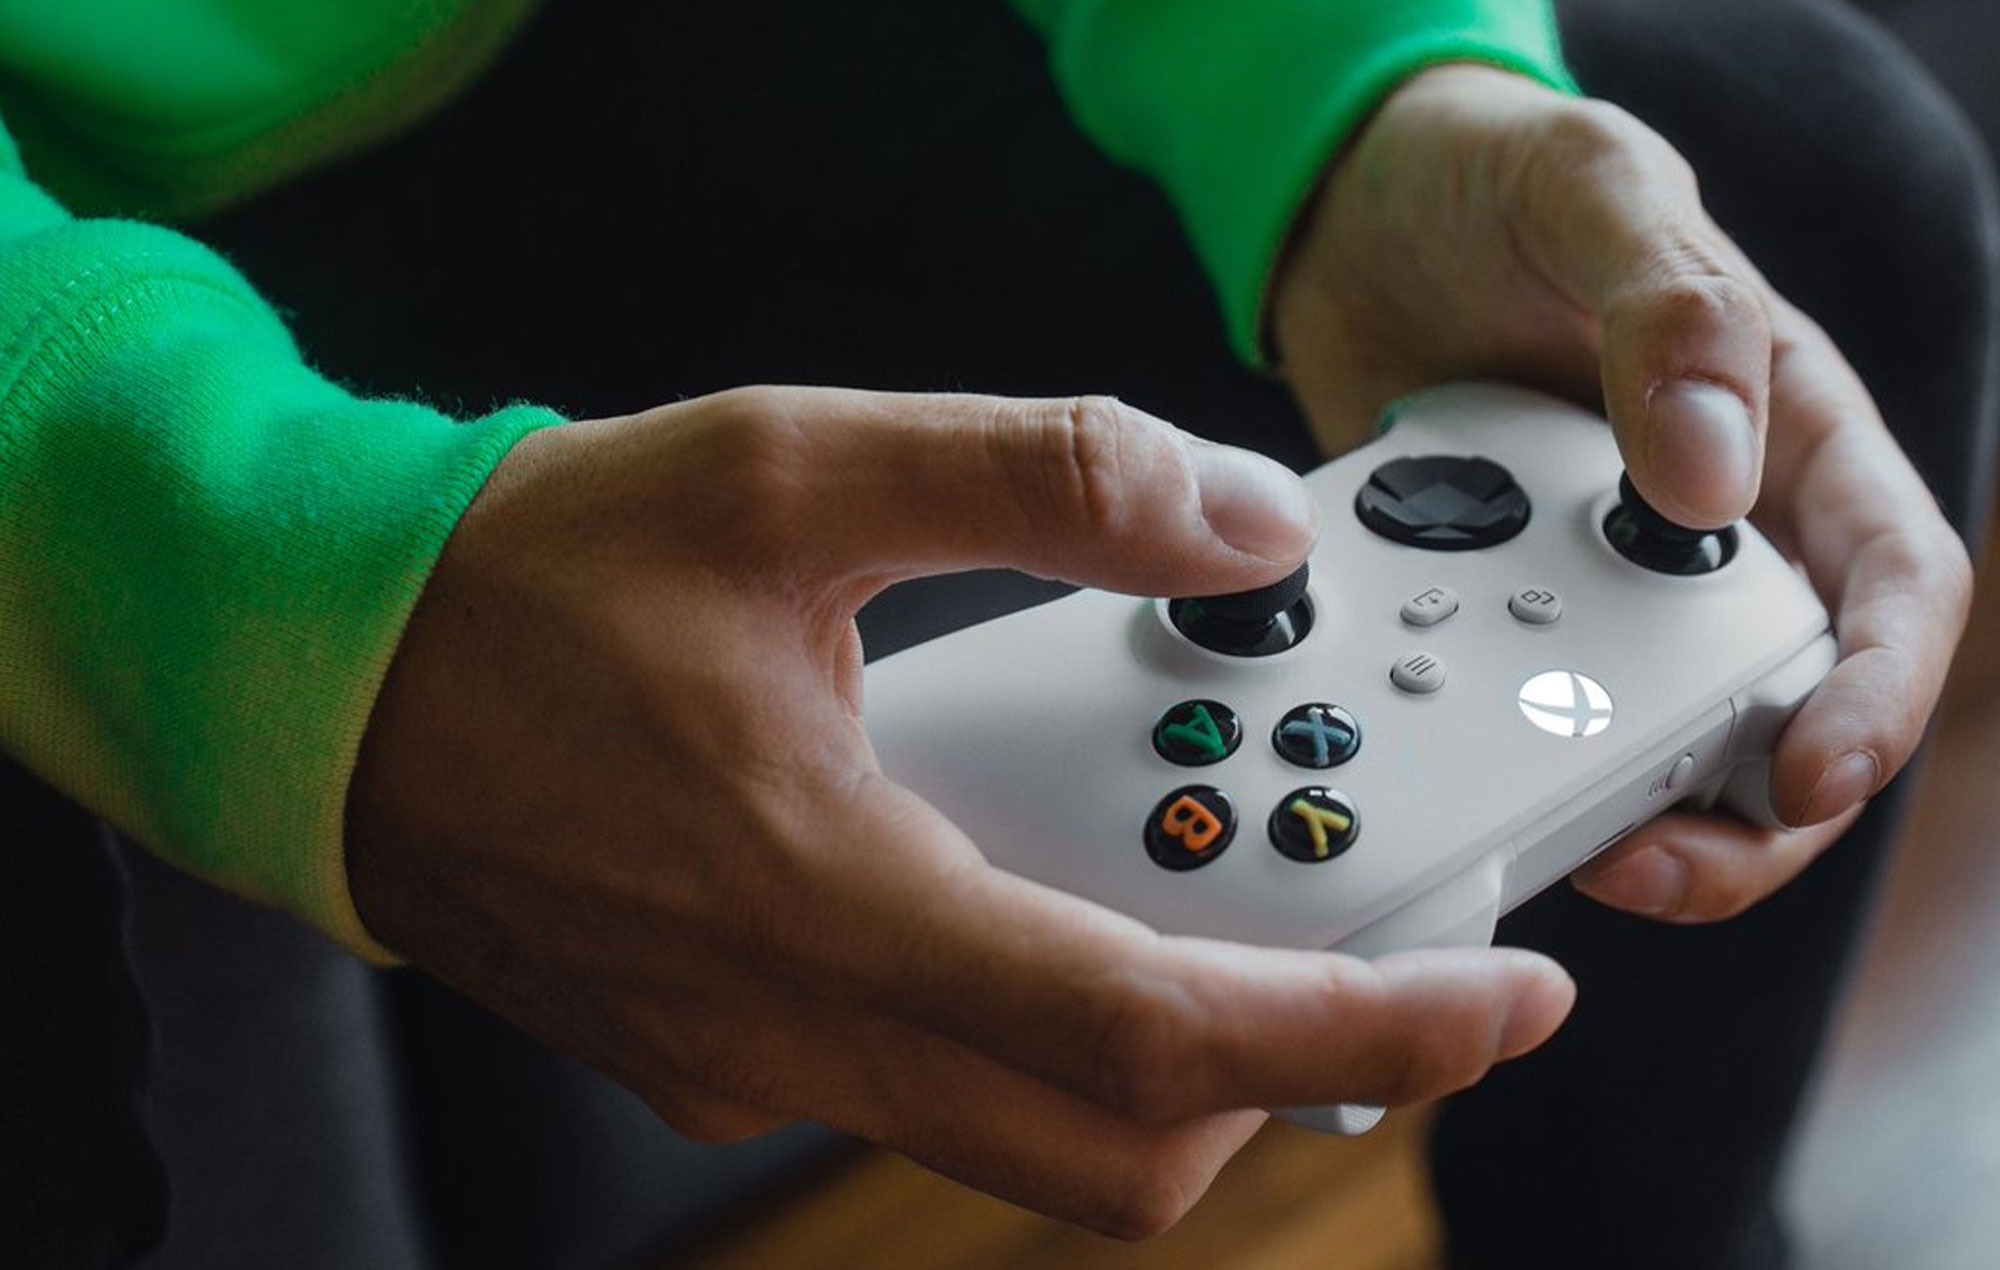 Hand wearing green sleeves holding a white xbox controller